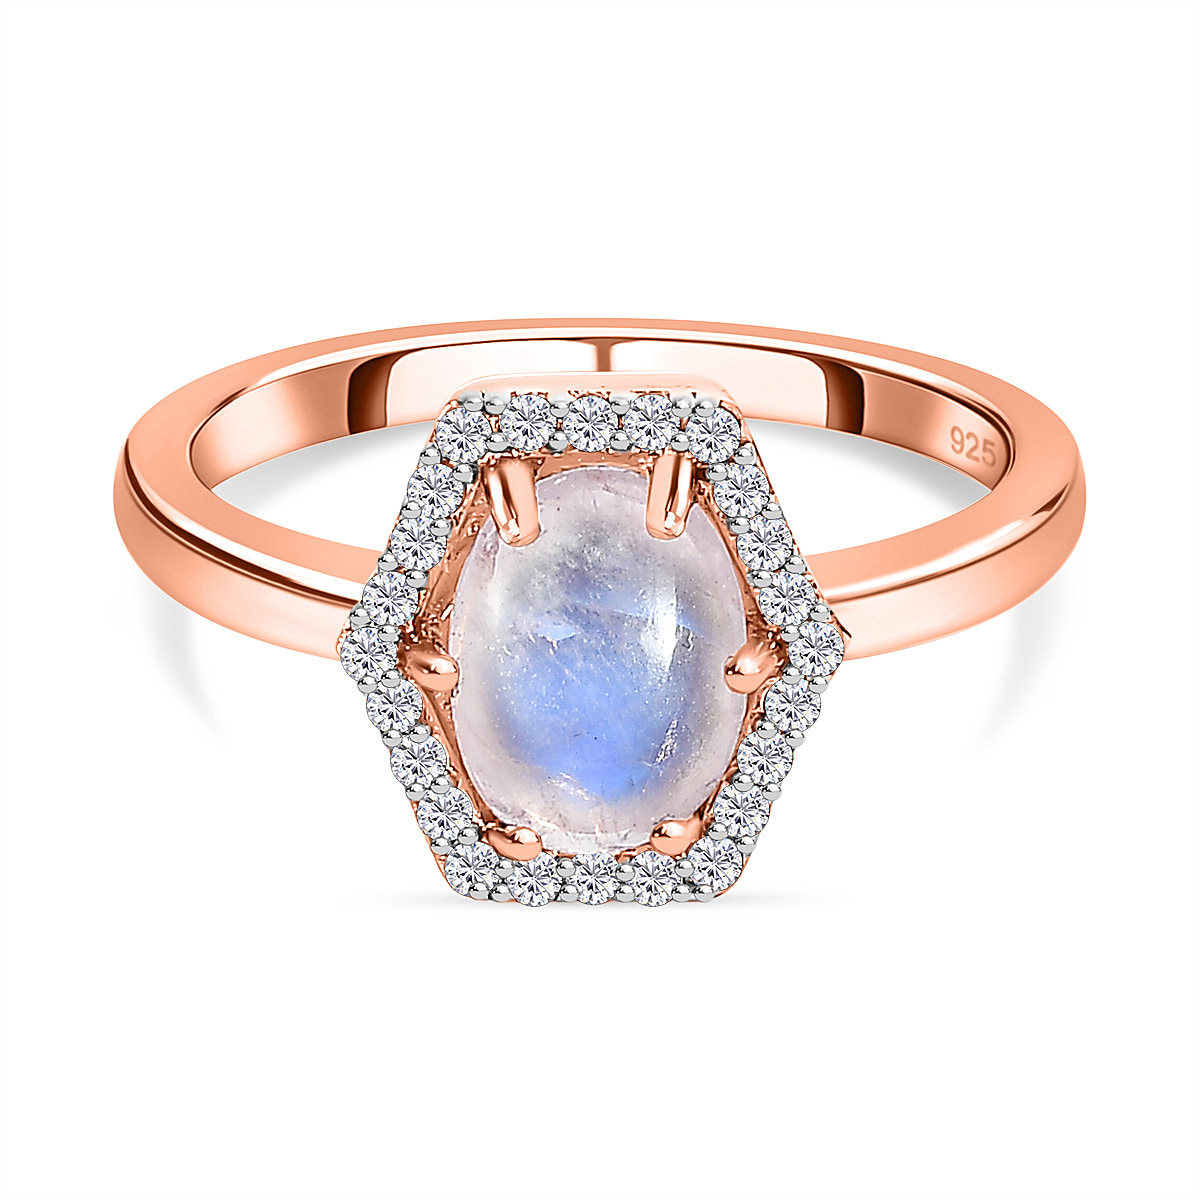 Premium Rainbow Moonstone and Natural Zircon Ring in 18K Rose Gold Vermeil Plated Sterling Silver 1.63 Ct.